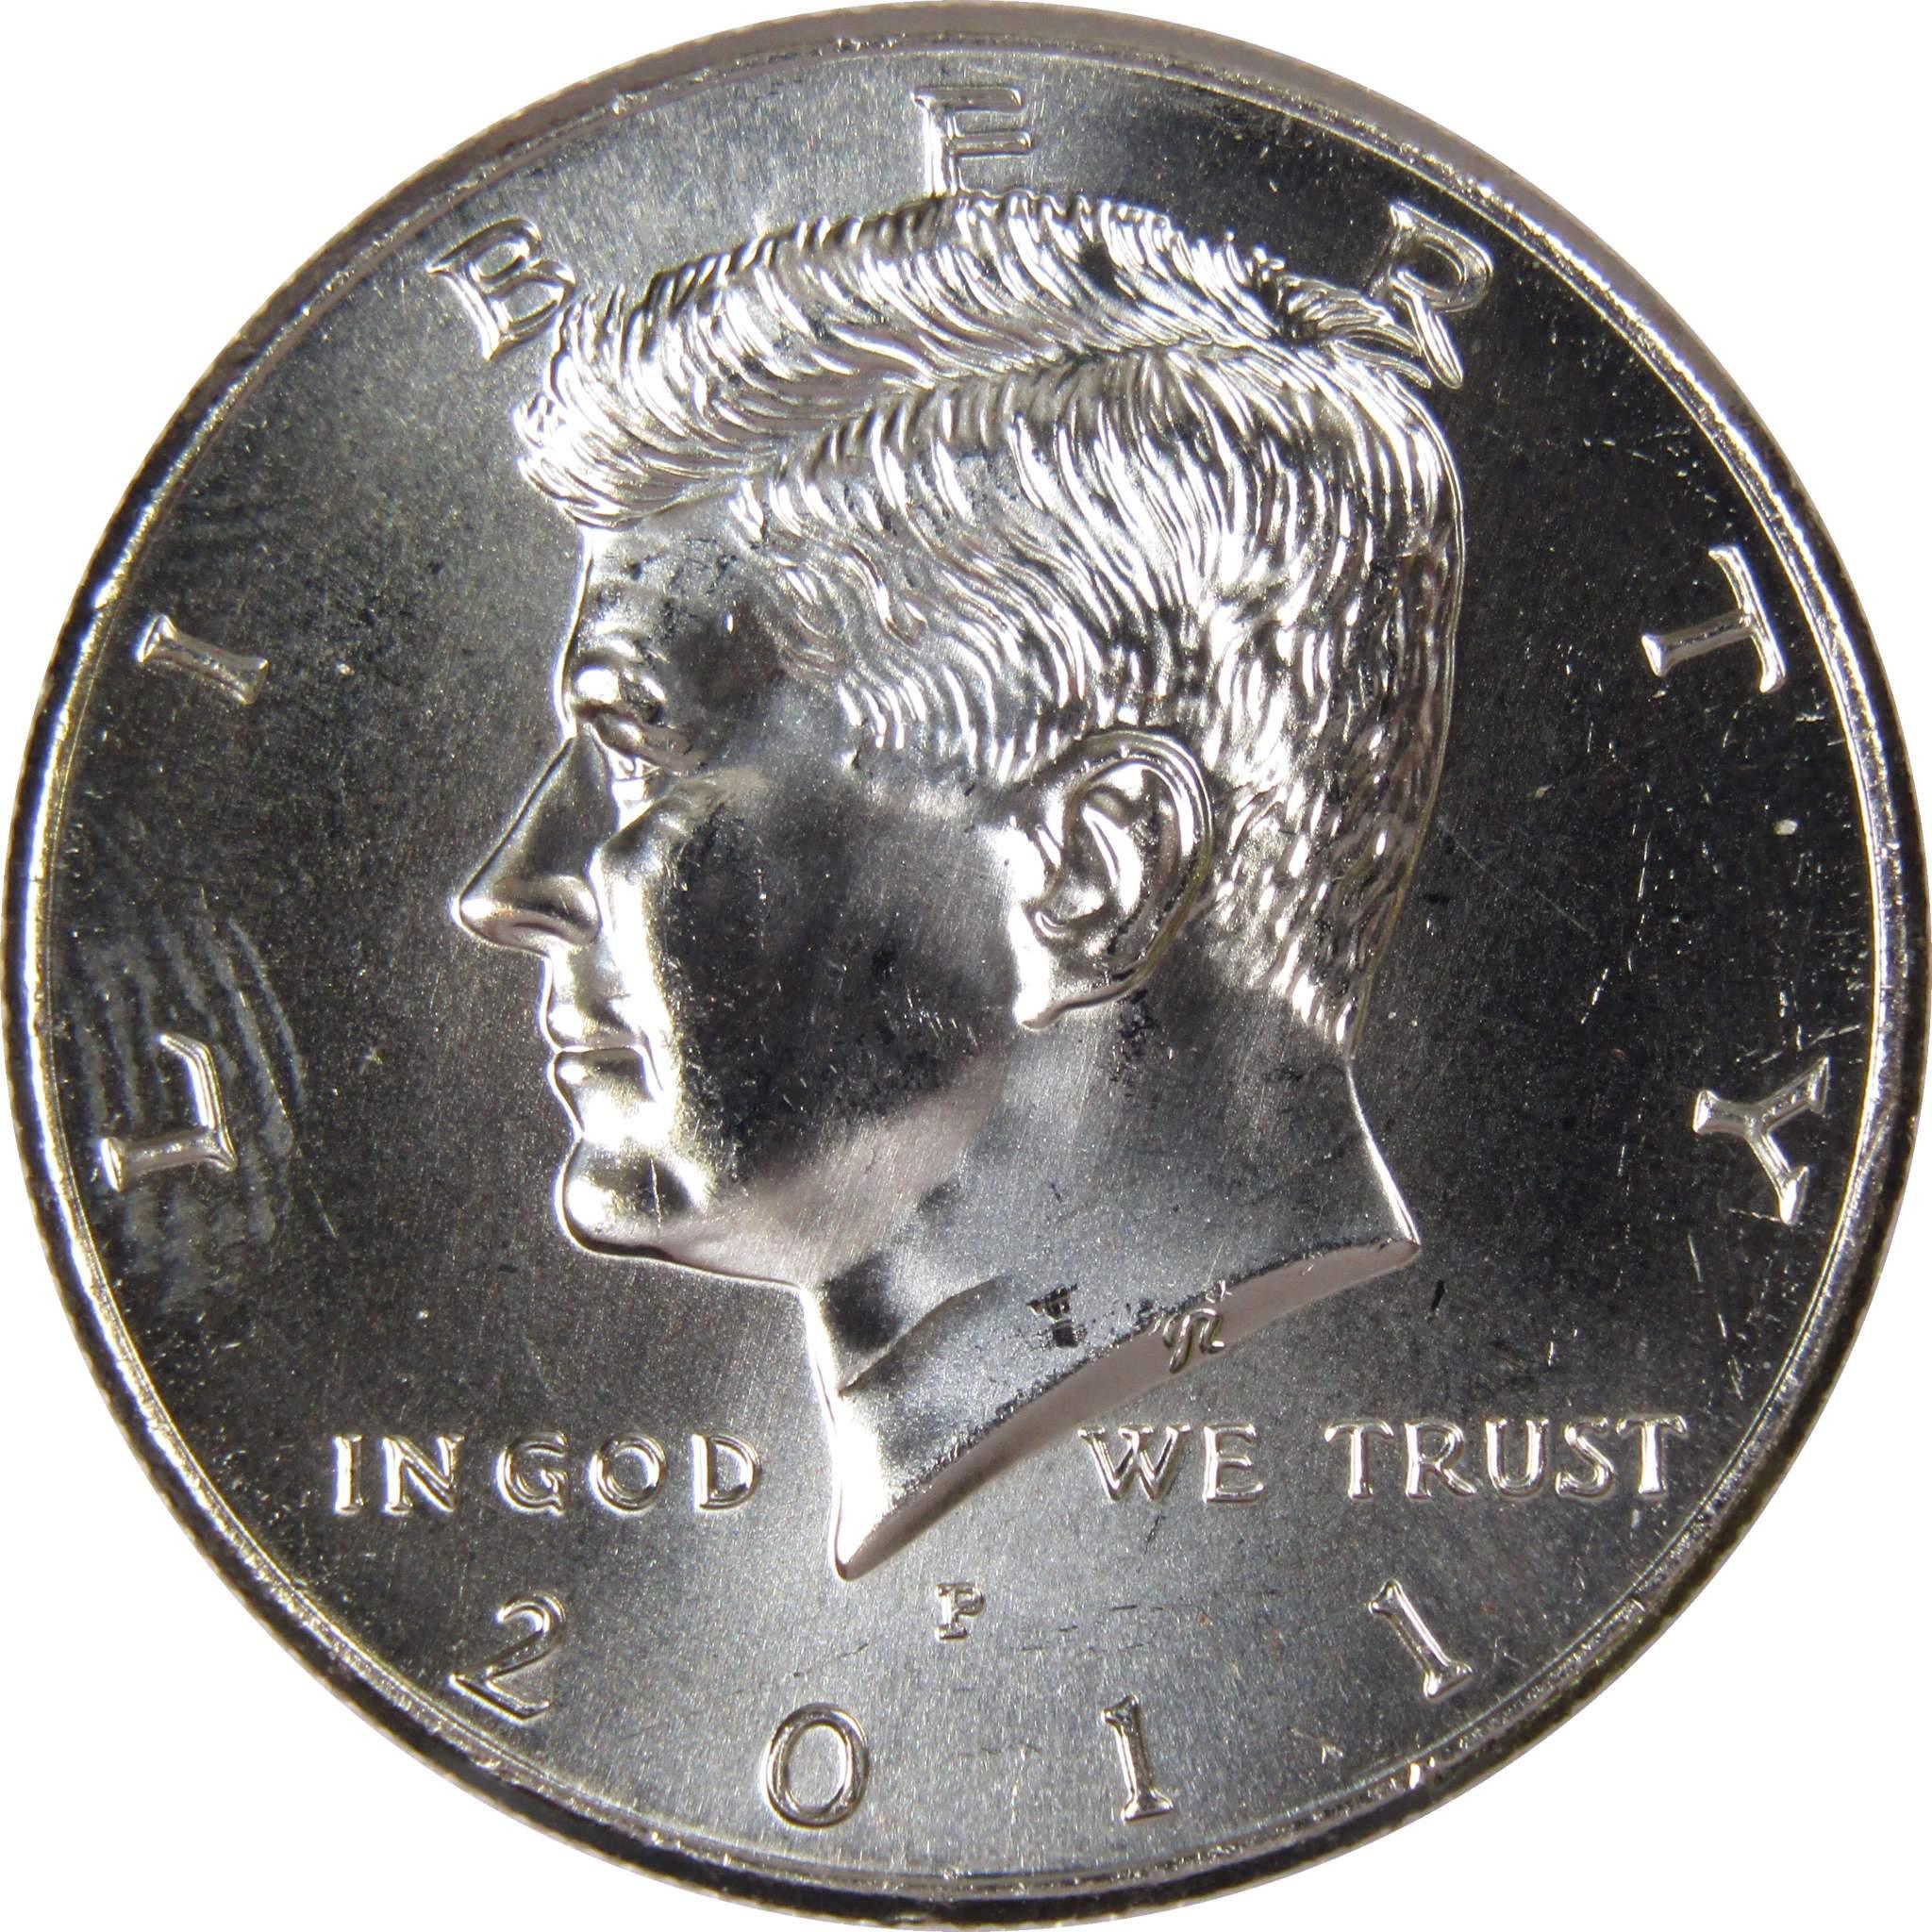 2011 P Kennedy Half Dollar BU Uncirculated Mint State 50c US Coin Collectible